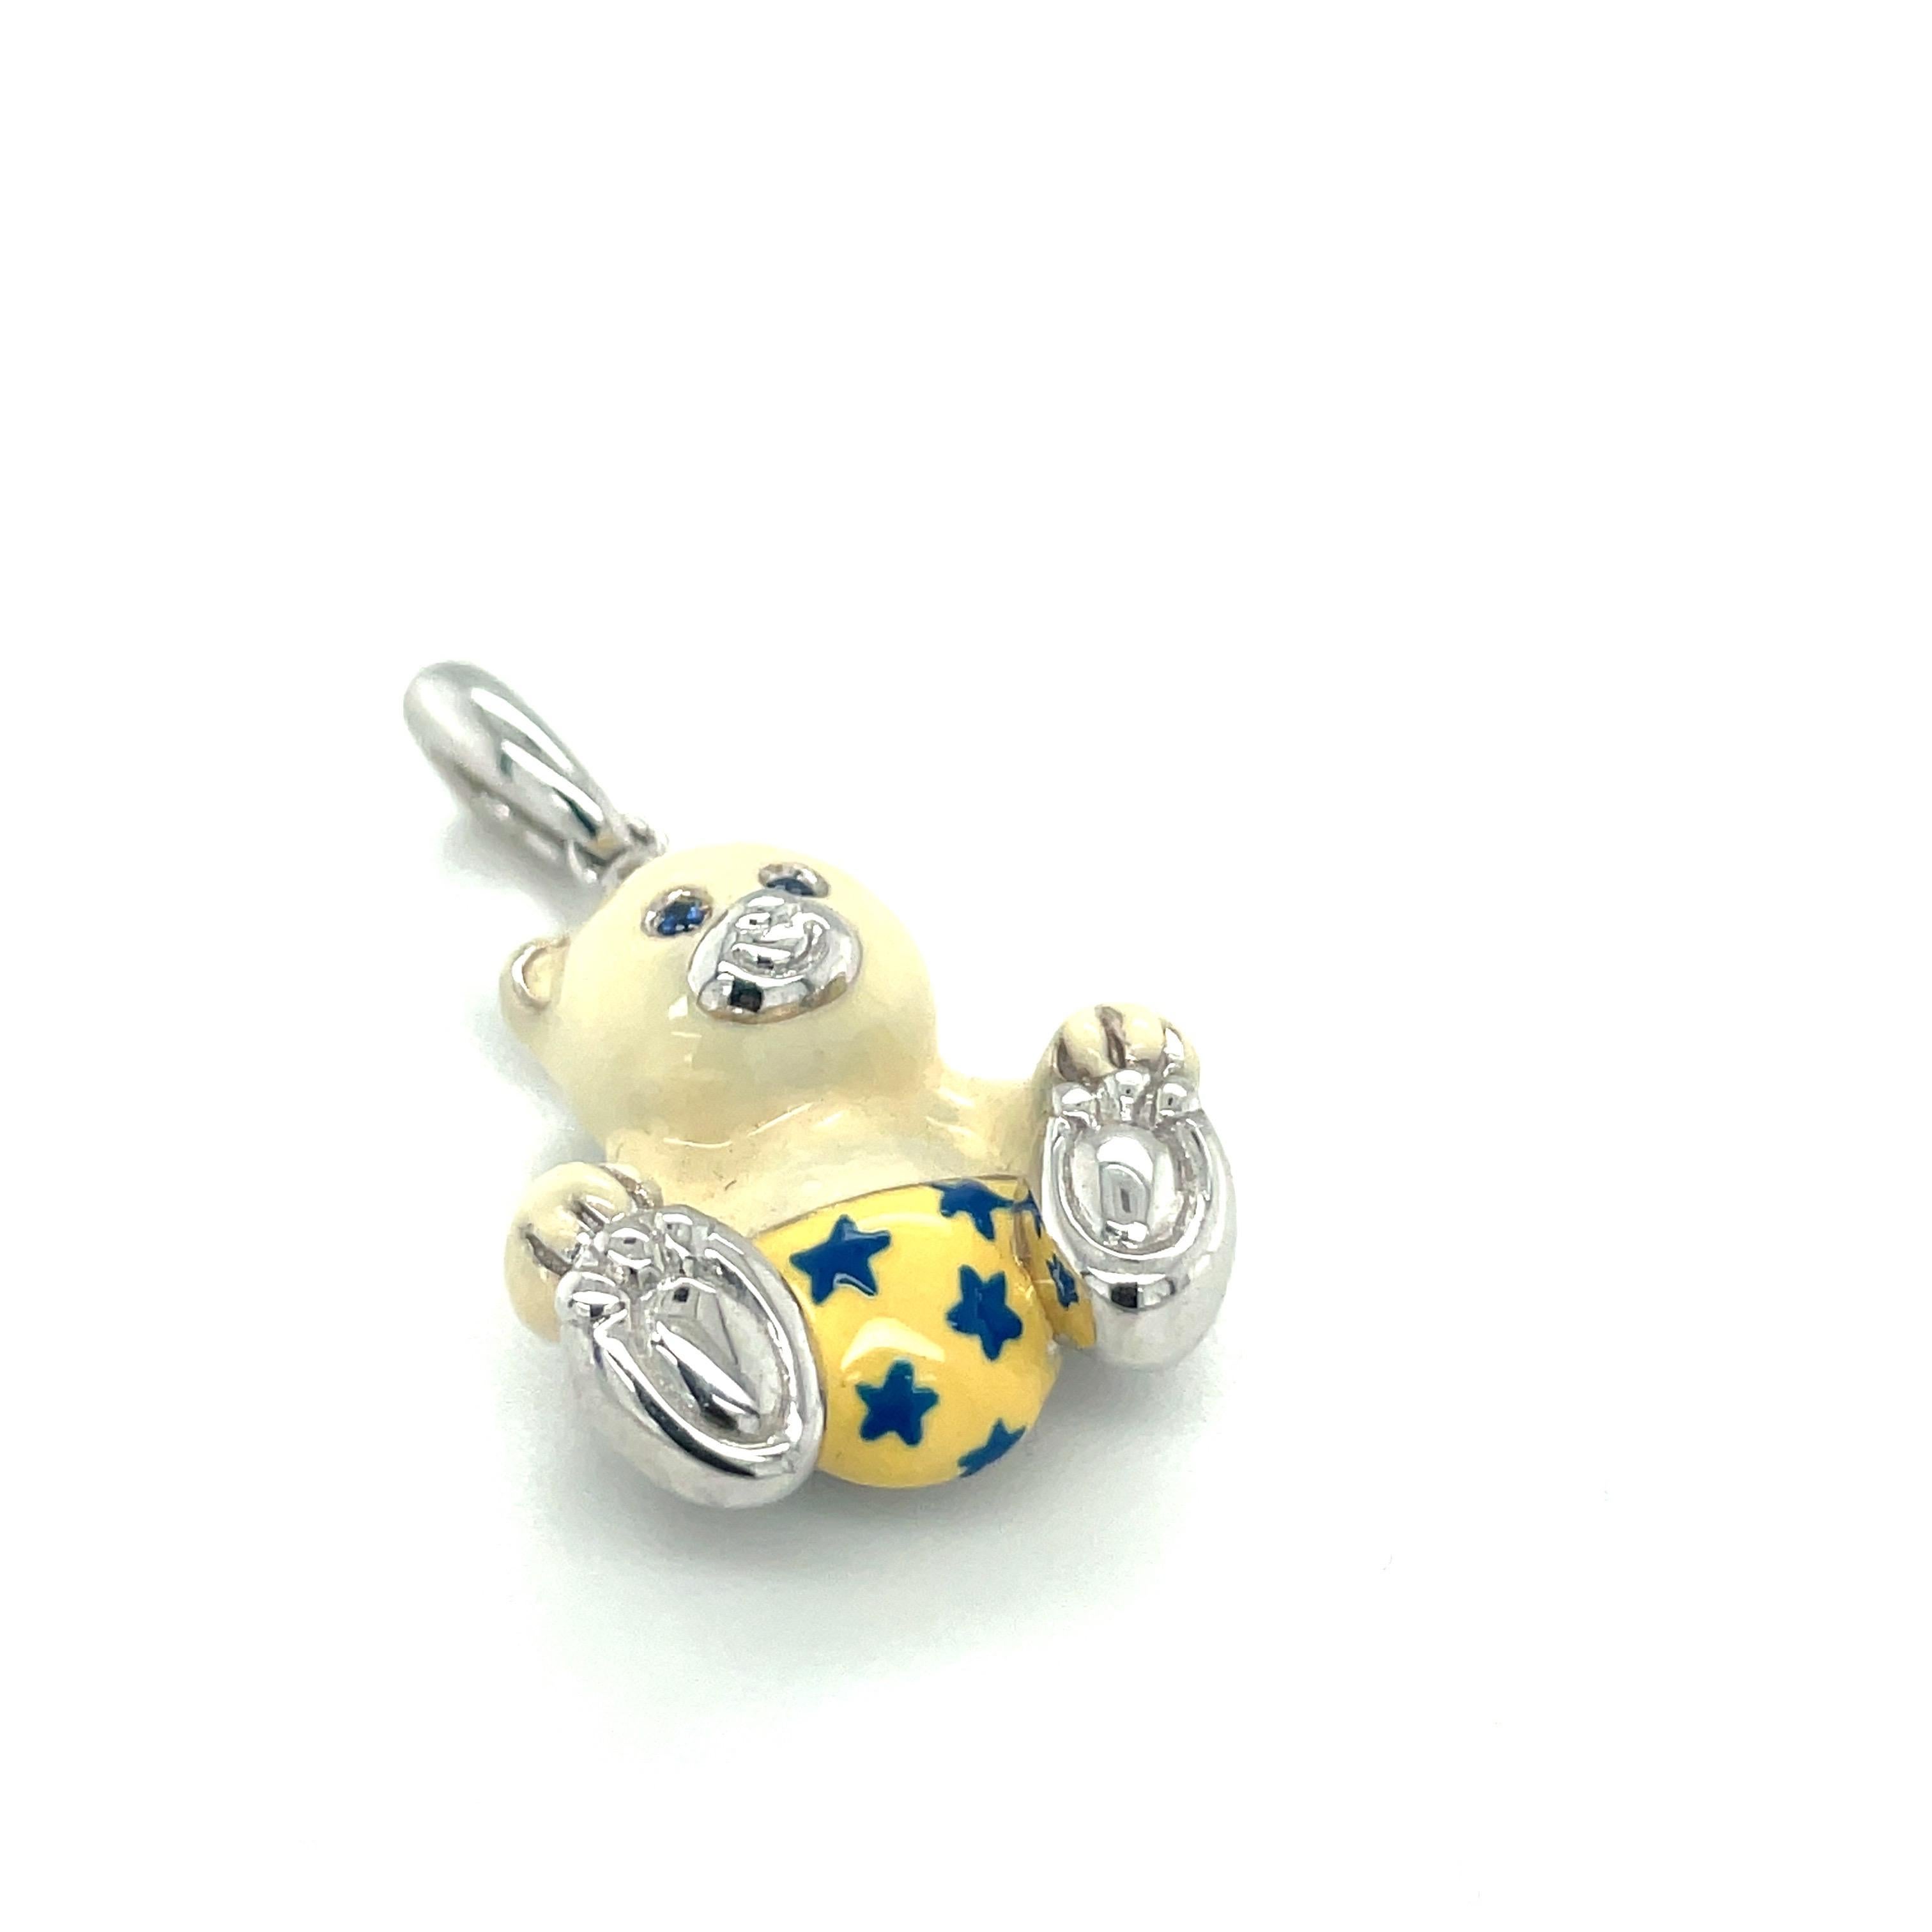 Just the cutest....Teddy bear charm made exclusively for Cellini by Ambrosi of Italy.

This 18 karat white gold teddy bear charm is crafted with a milky white enamel for the body. His outfit is a yellow with blue stars.. He has blue sapphire eyes.